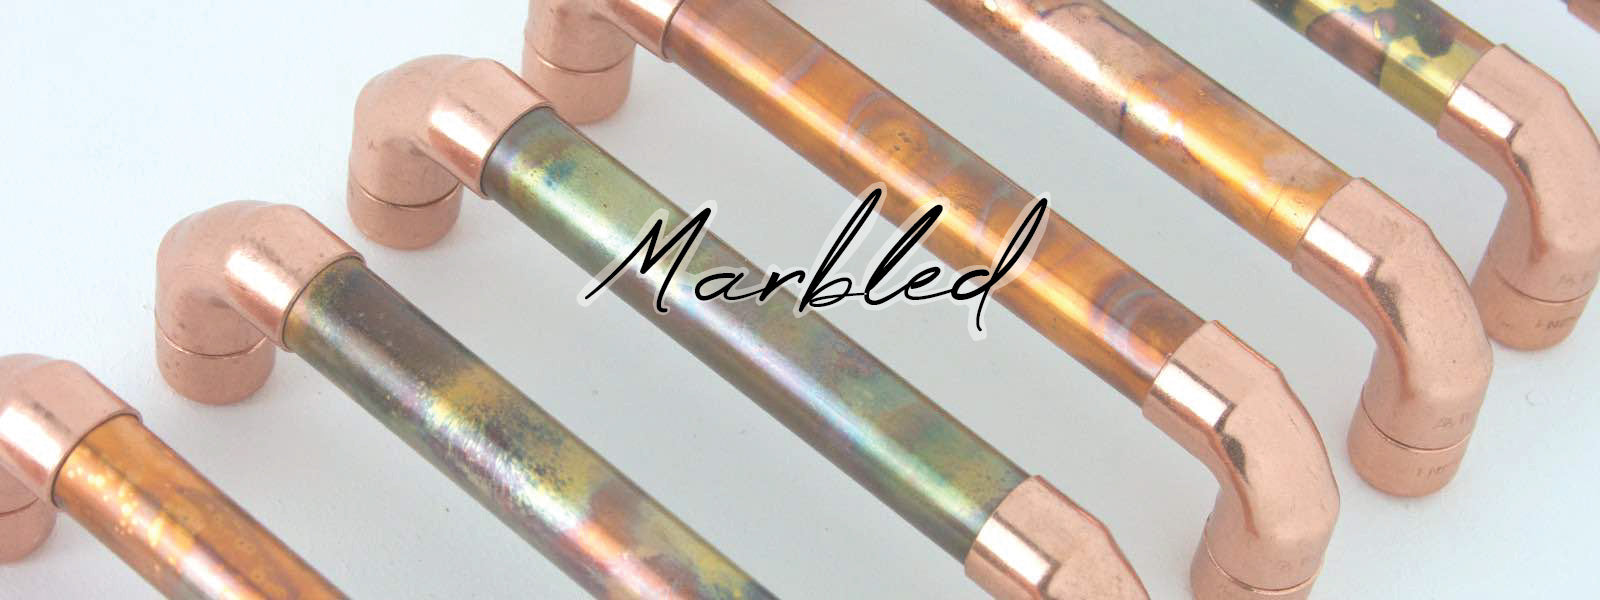 Marbled Copper Handles and Copper Kitchen Hardware